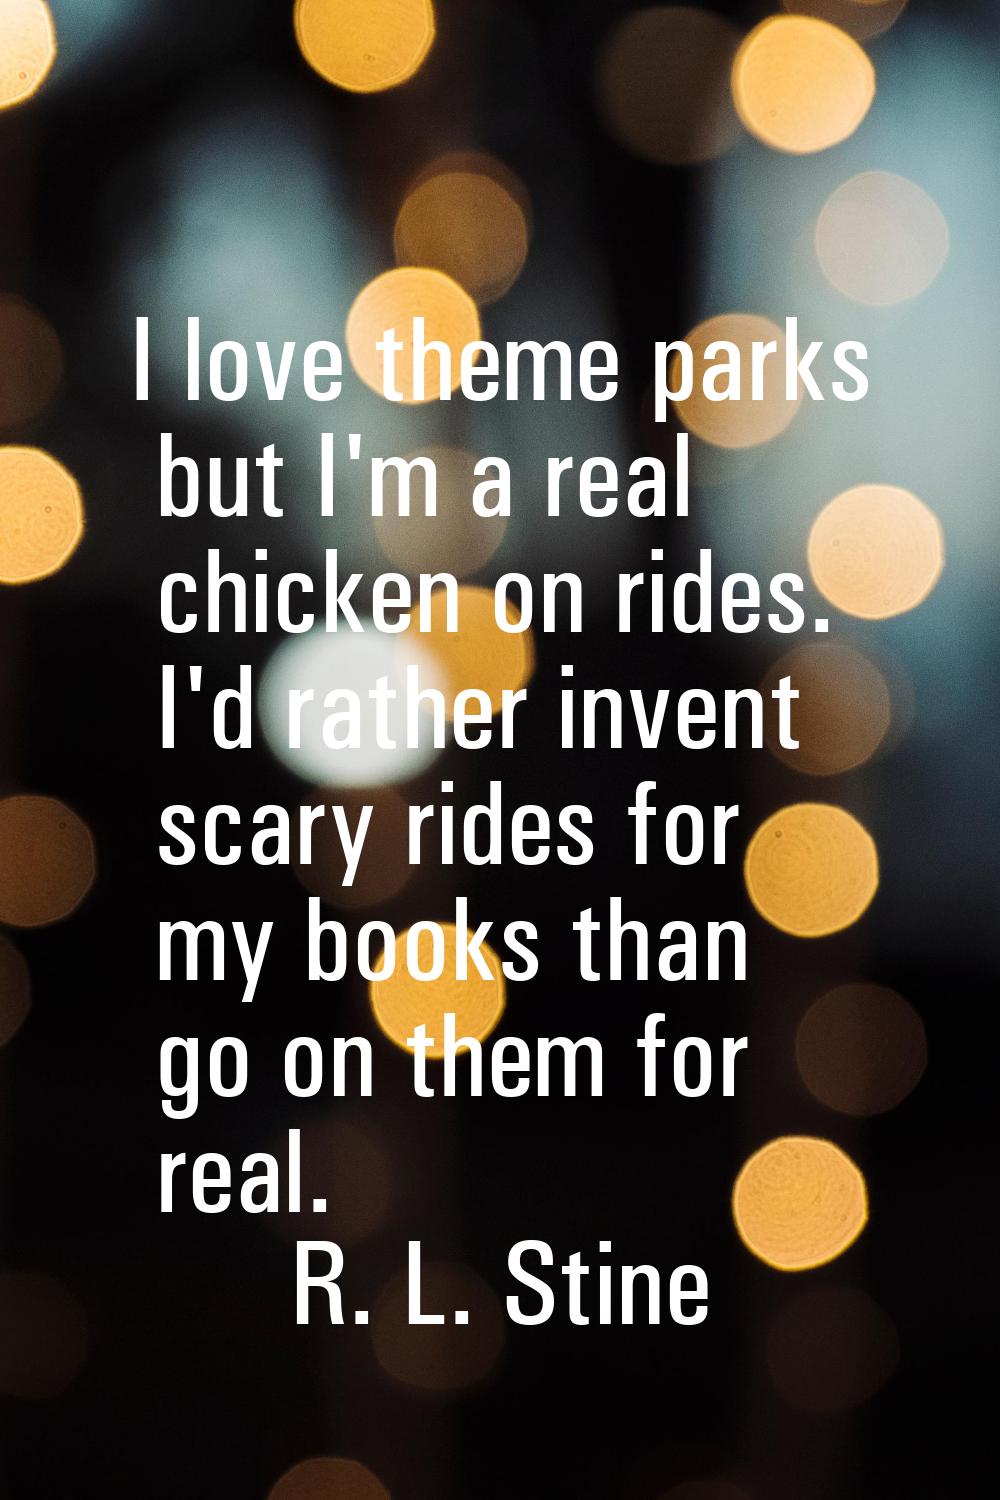 I love theme parks but I'm a real chicken on rides. I'd rather invent scary rides for my books than